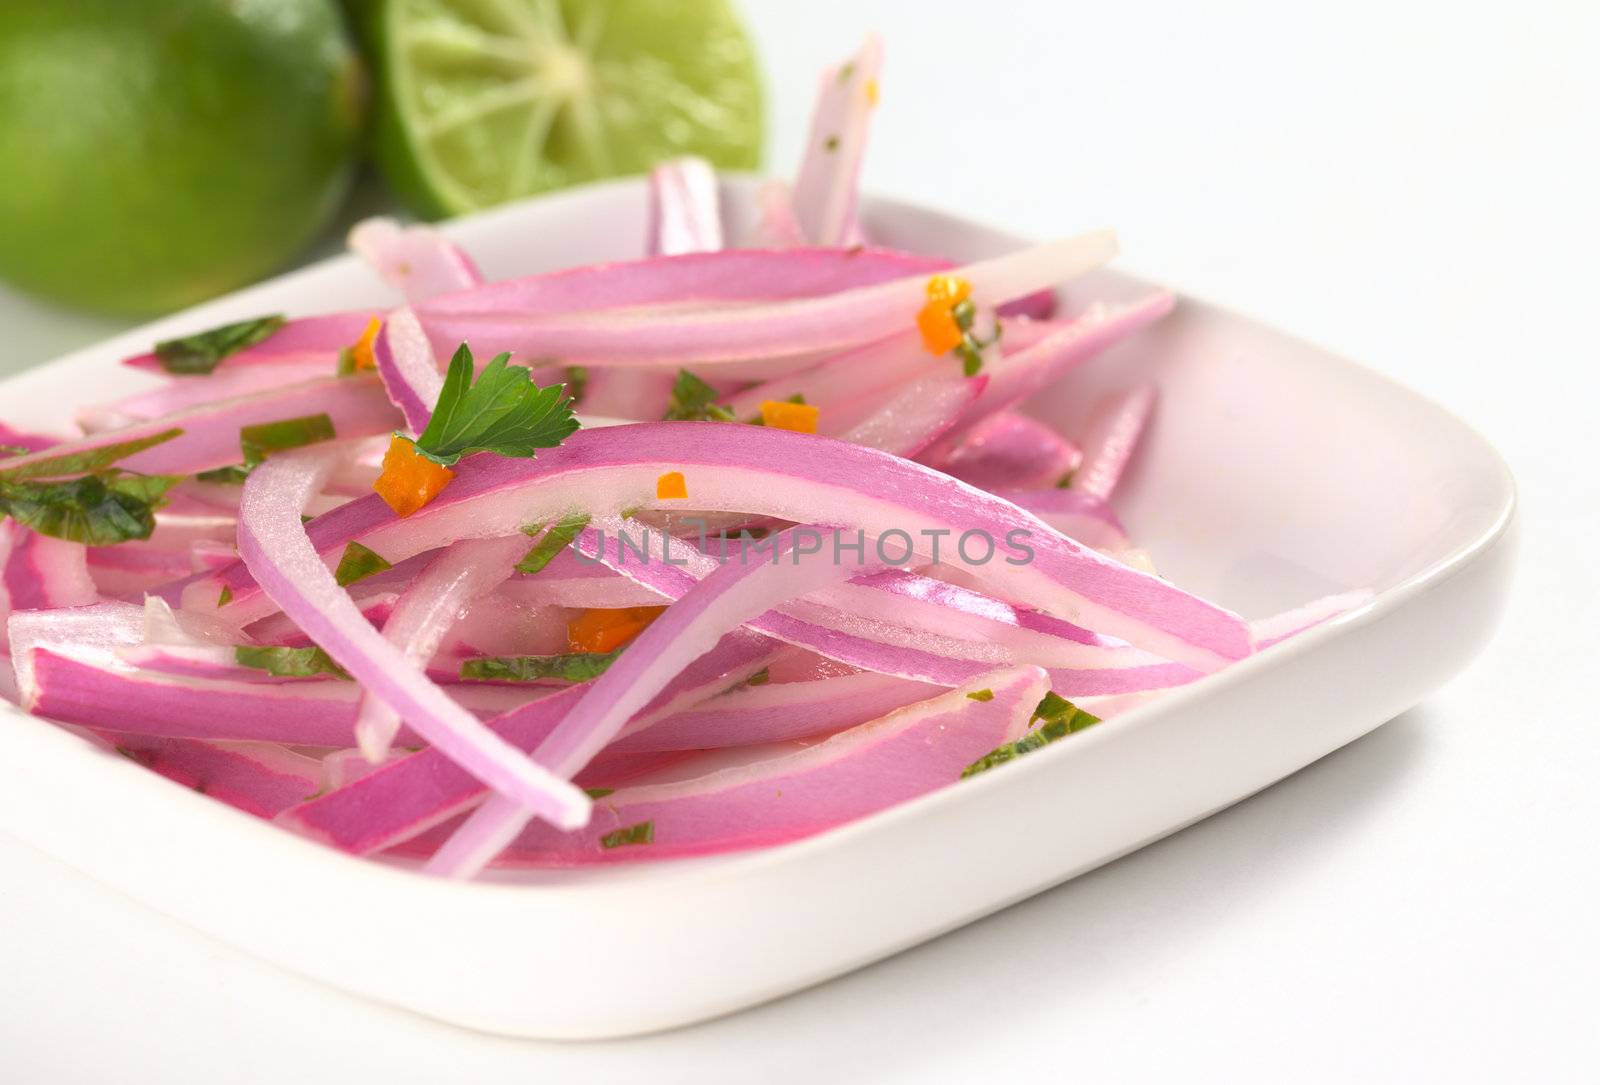 Peruvian Salsa Criolla made of red onion slices, hot pepper called aji, fresh parsley and limes (Very Shallow Depth of Field, Focus on the onion slice in the middle) 